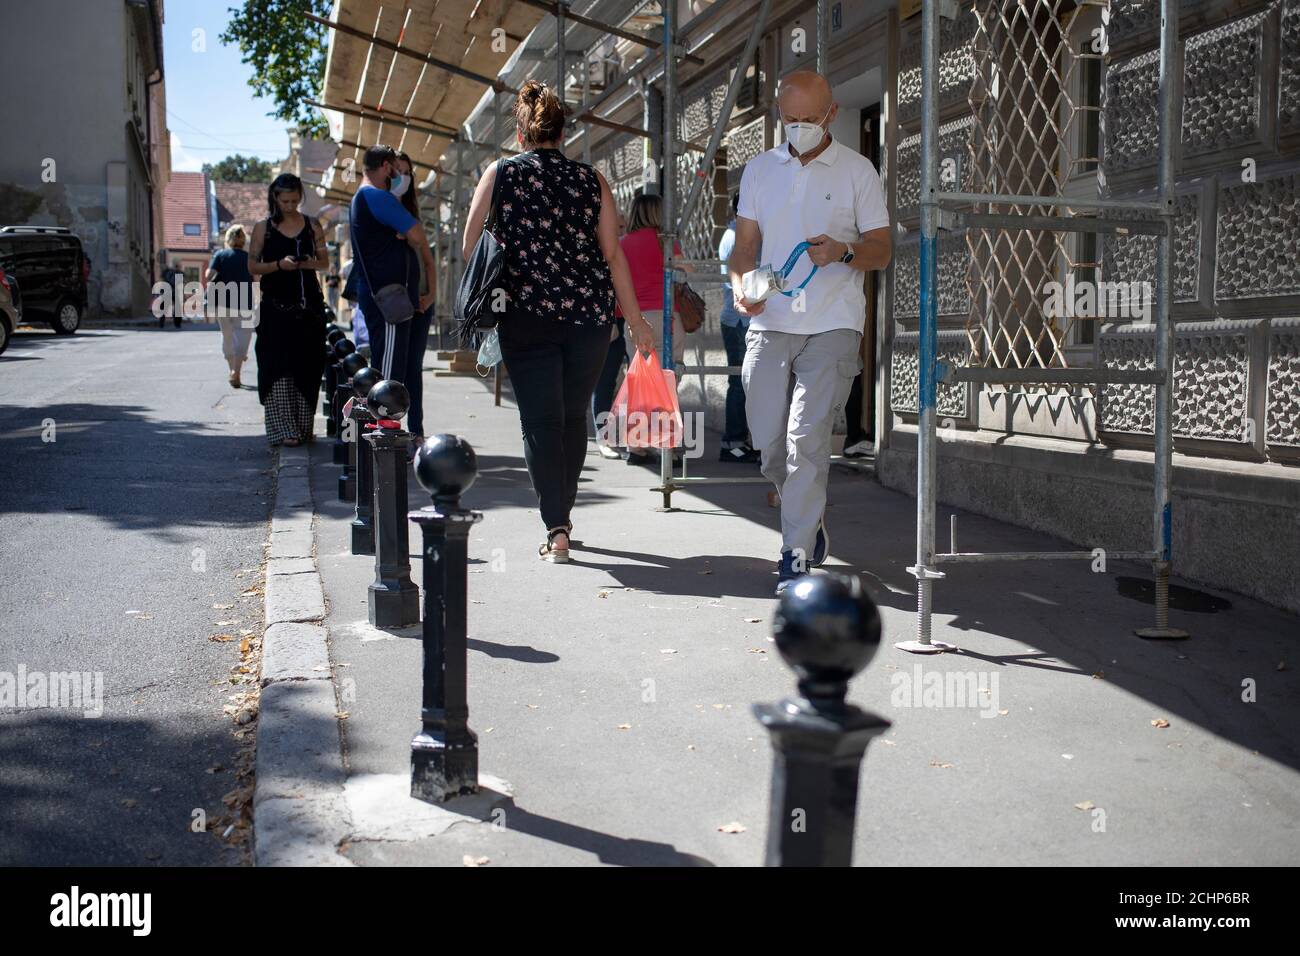 Belgrade, Serbia, Sep 4, 2020: People walking down the street under scaffolding mounted on the front wall of Zemun municipality building Stock Photo